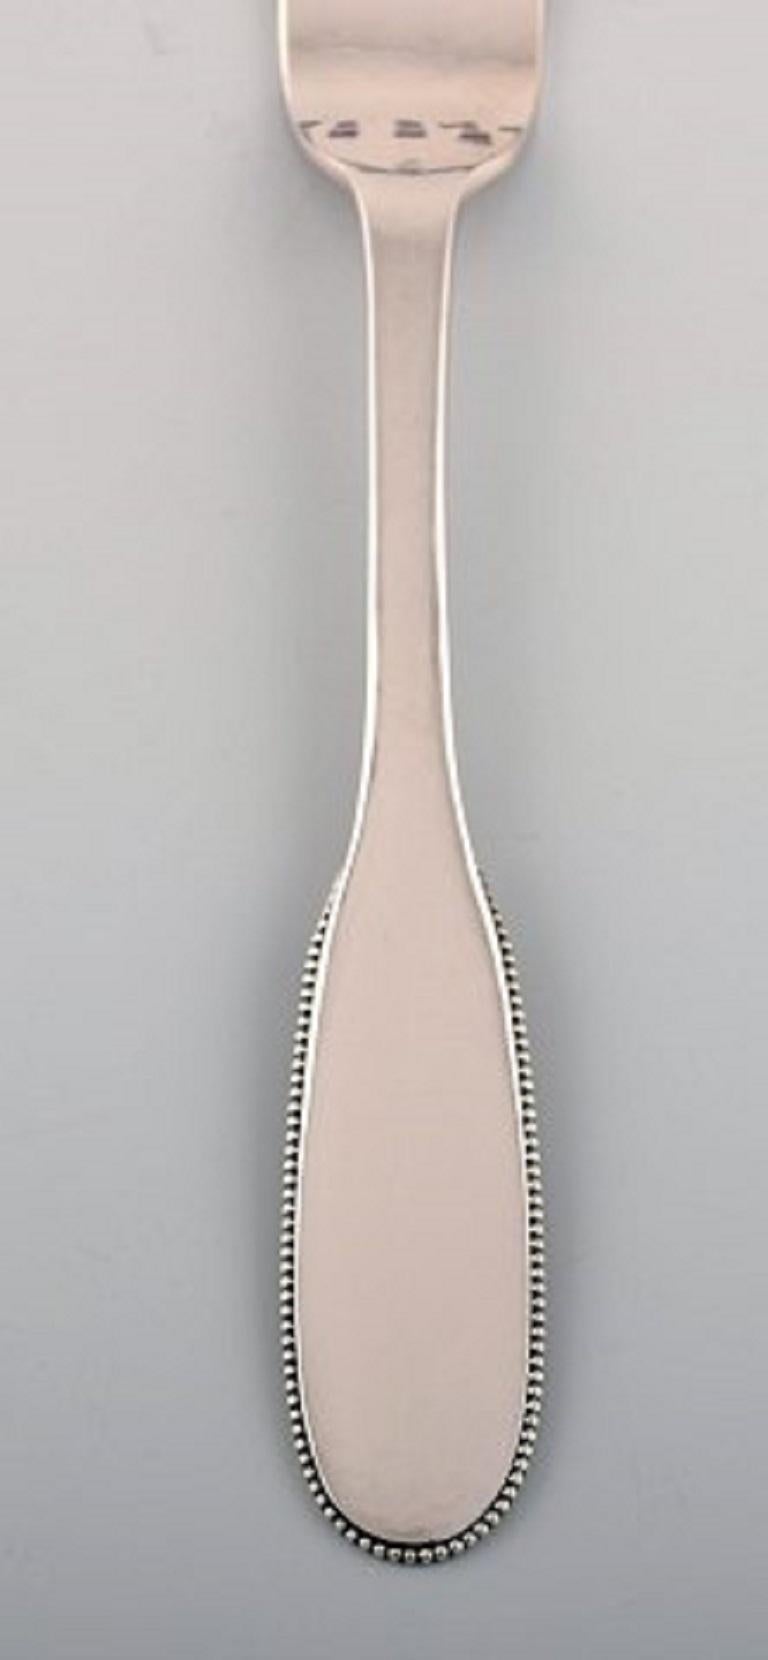 Evald Nielsen number 14 dinner fork in hammered silver, 1920s.
9 forks are available.
Measures: Length 21 cm.
Stamped.
In excellent condition.
Our skilled Georg Jensen silversmith / goldsmith can polish all silver and gold so that it looks like